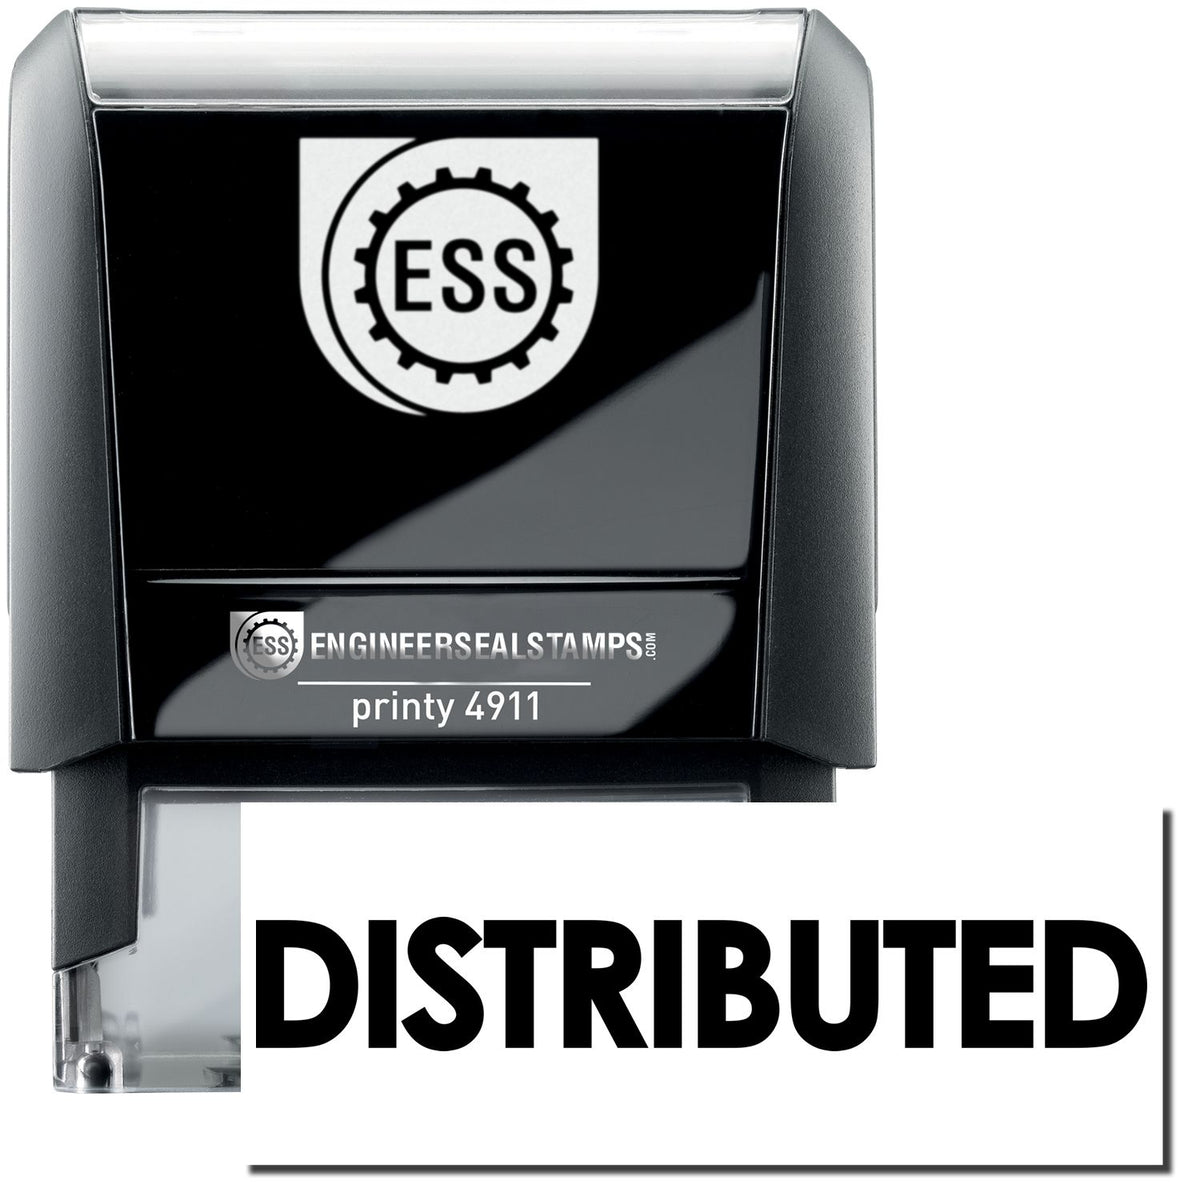 A self-inking stamp with a stamped image showing how the text &quot;DISTRIBUTED&quot; in bold font is displayed after stamping.